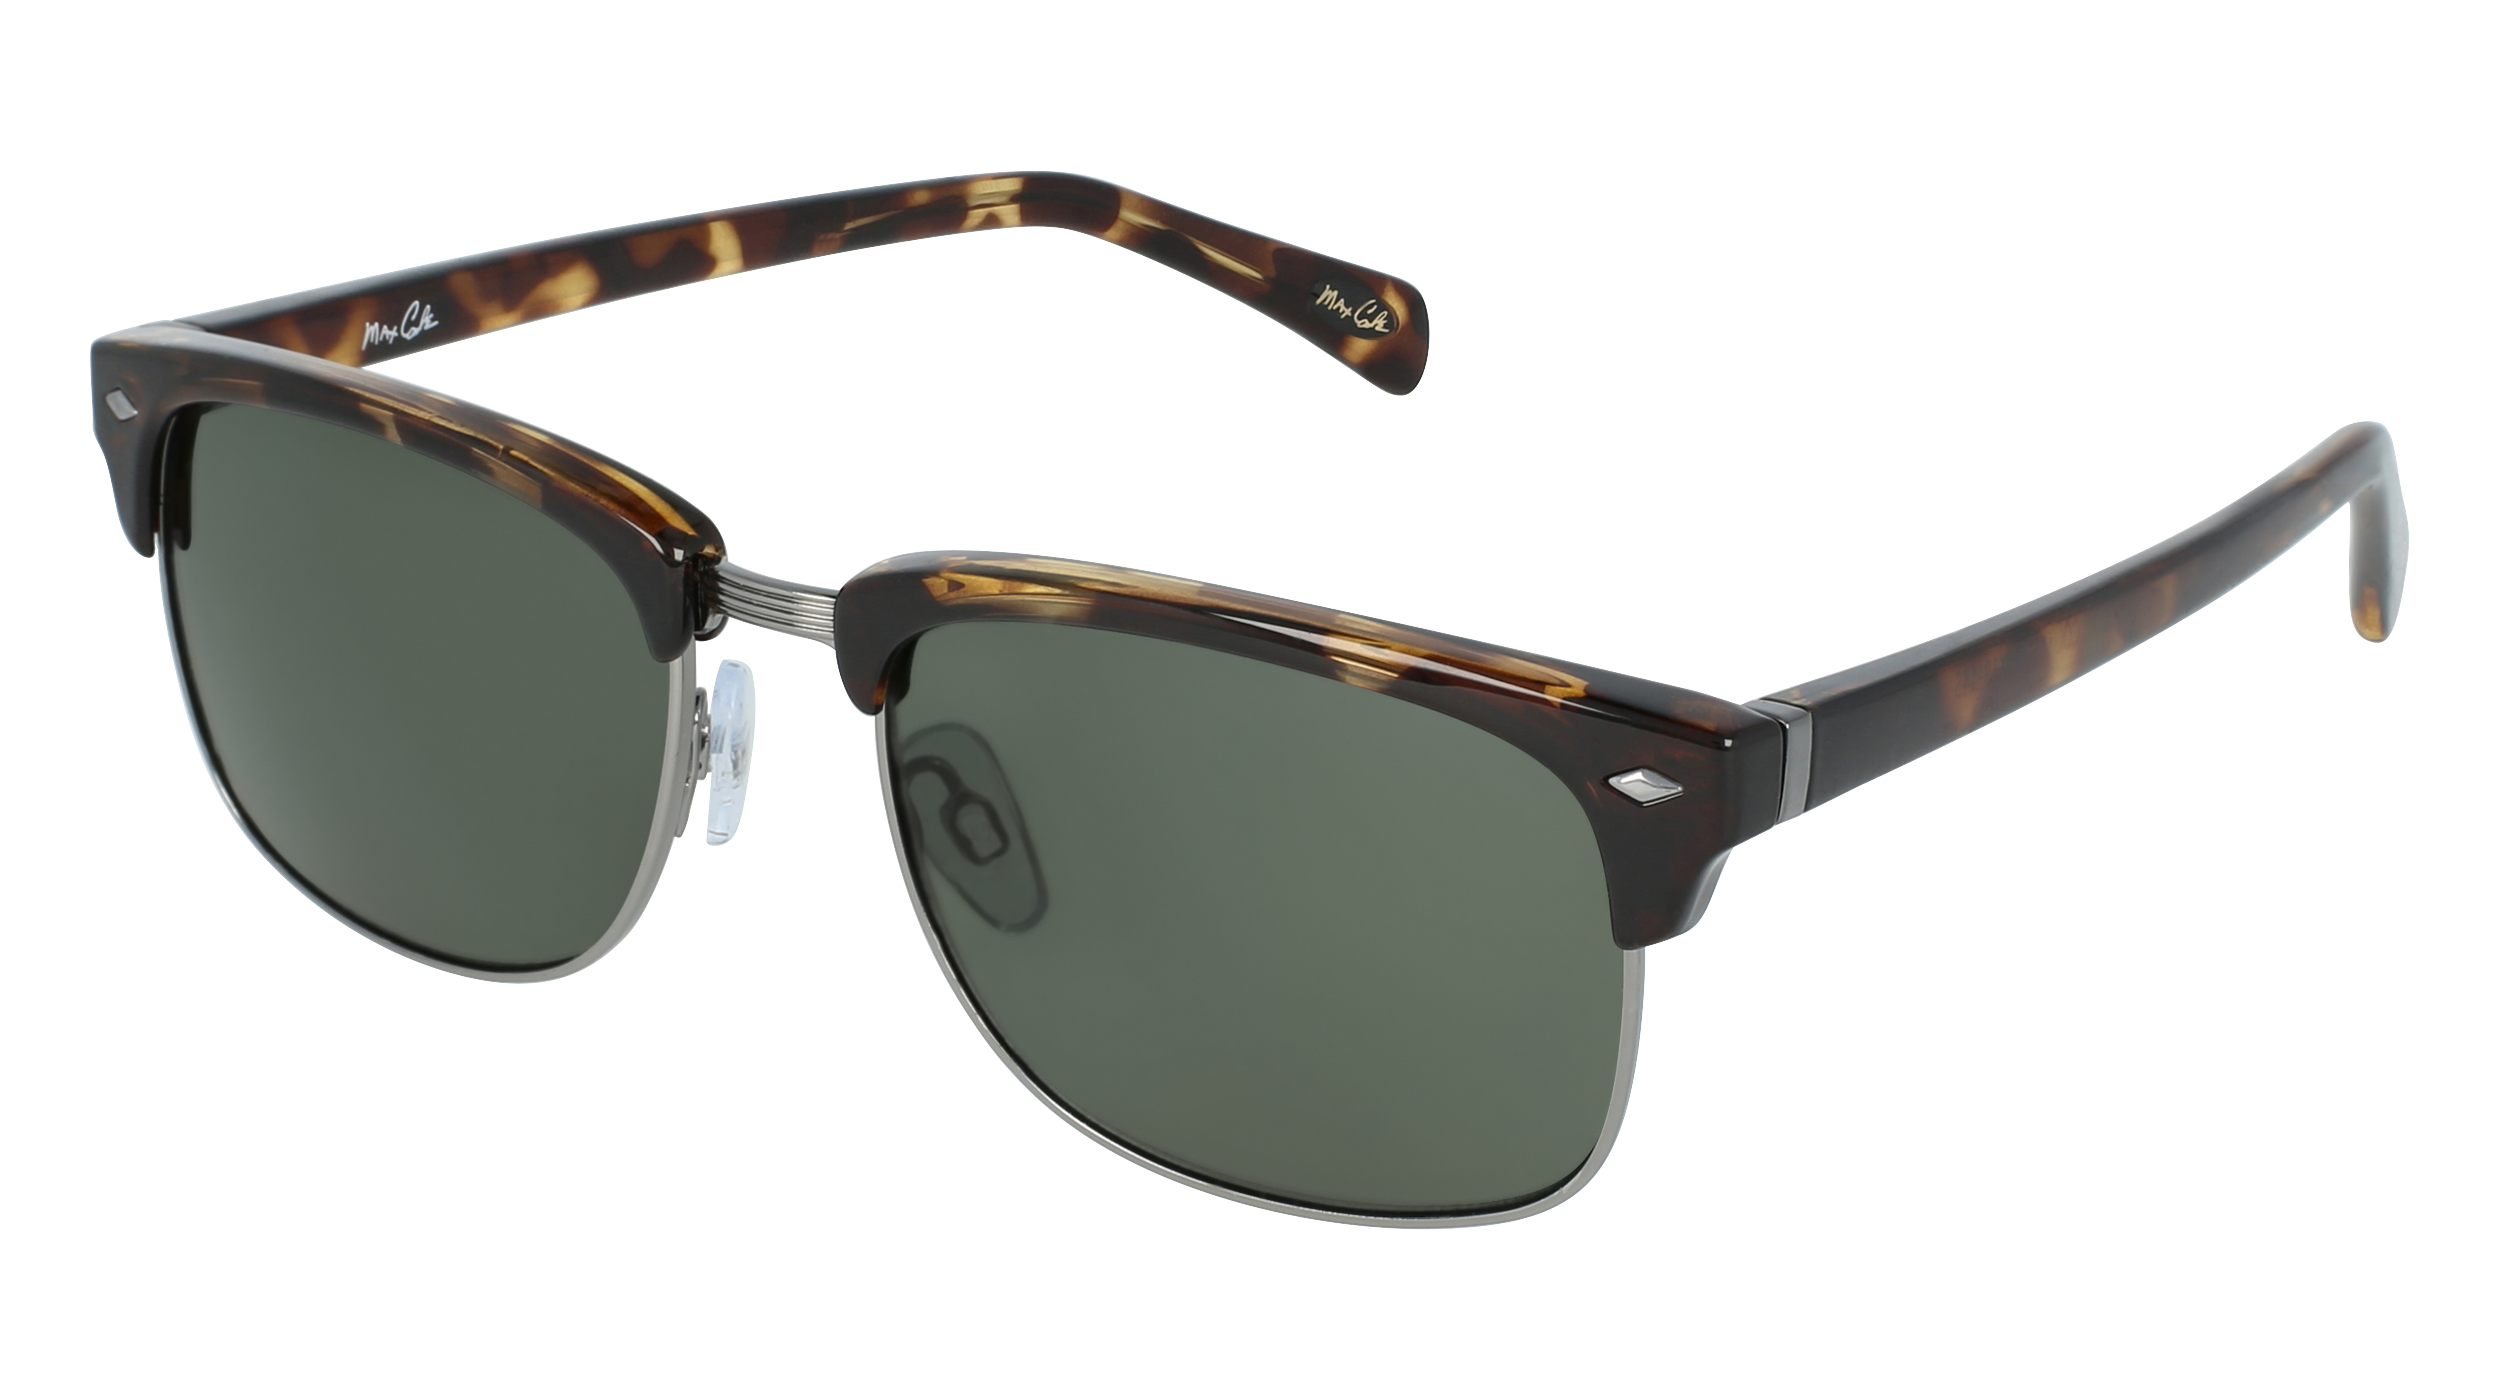 M MC 1486 men's sunglasses (from the side)